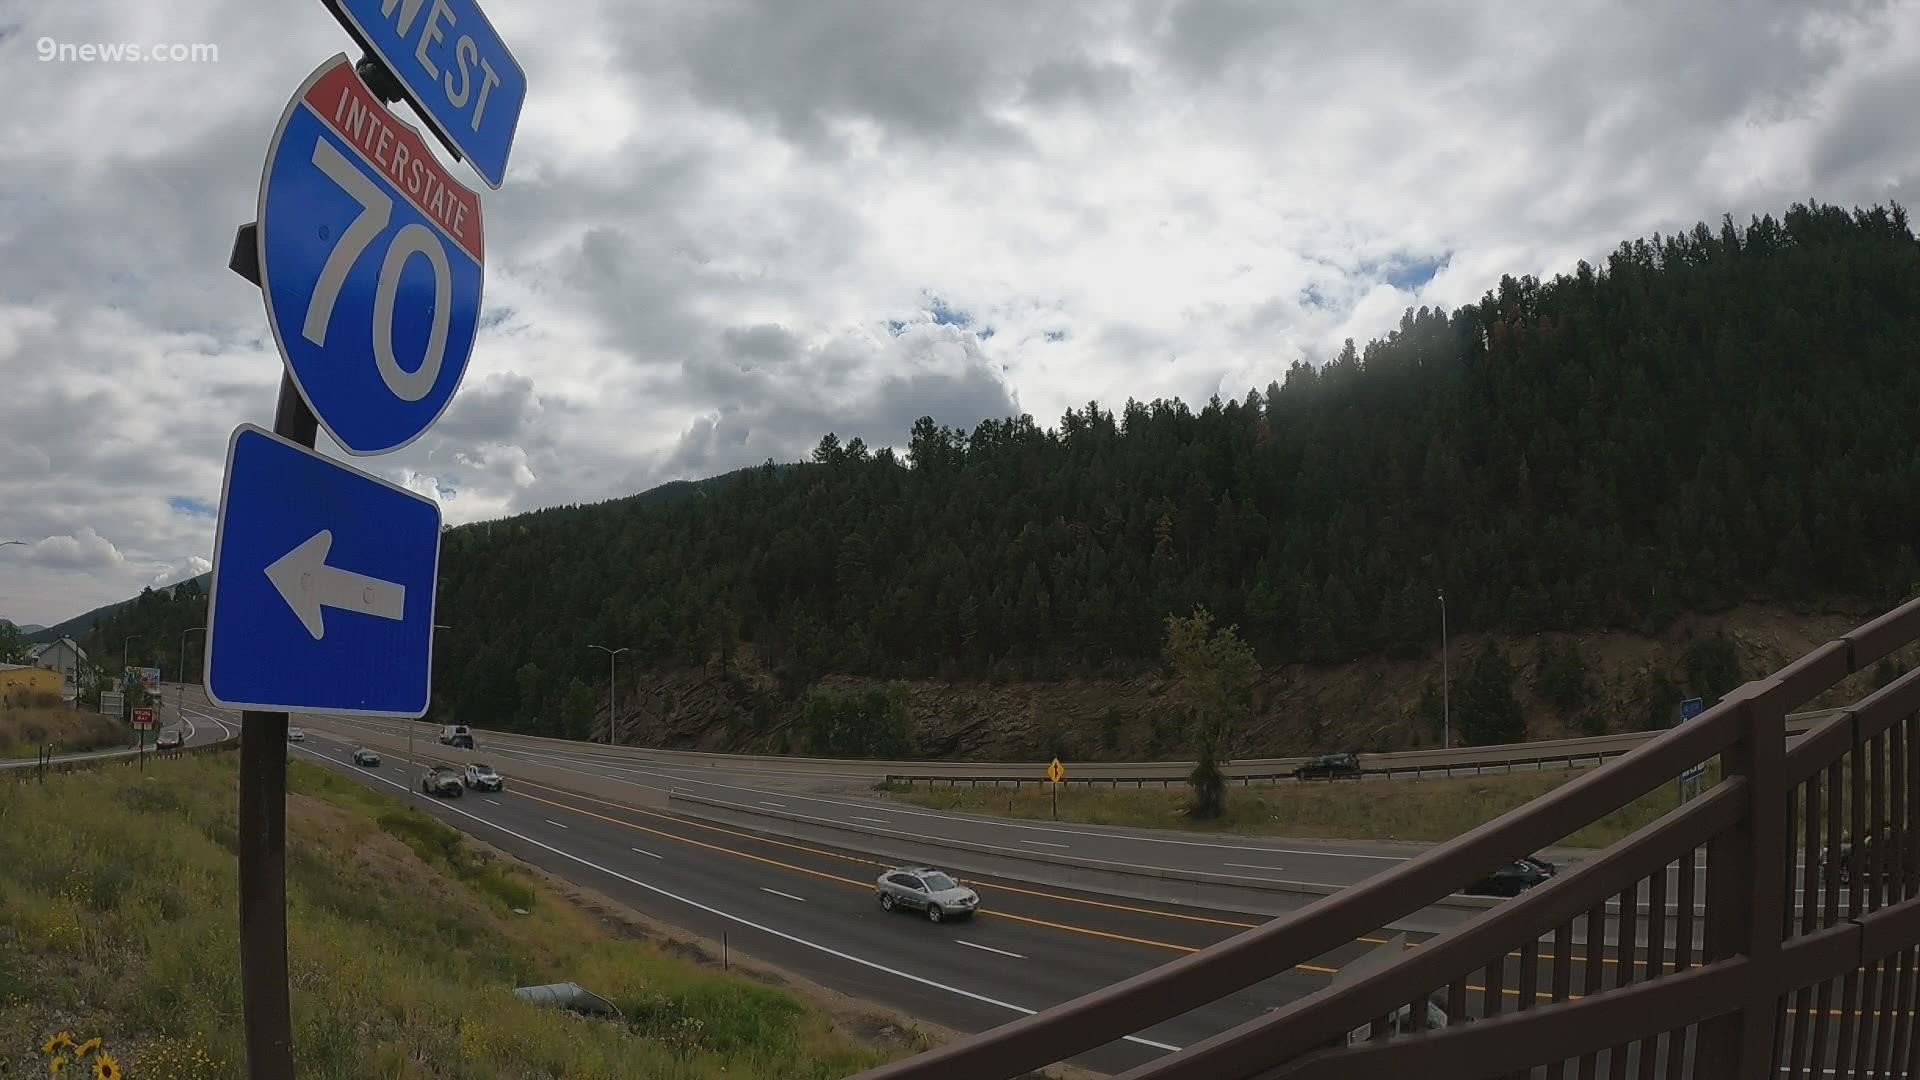 The Colorado Department of Transportation's new I-70 westbound express lane will see its first big test over the holiday weekend.